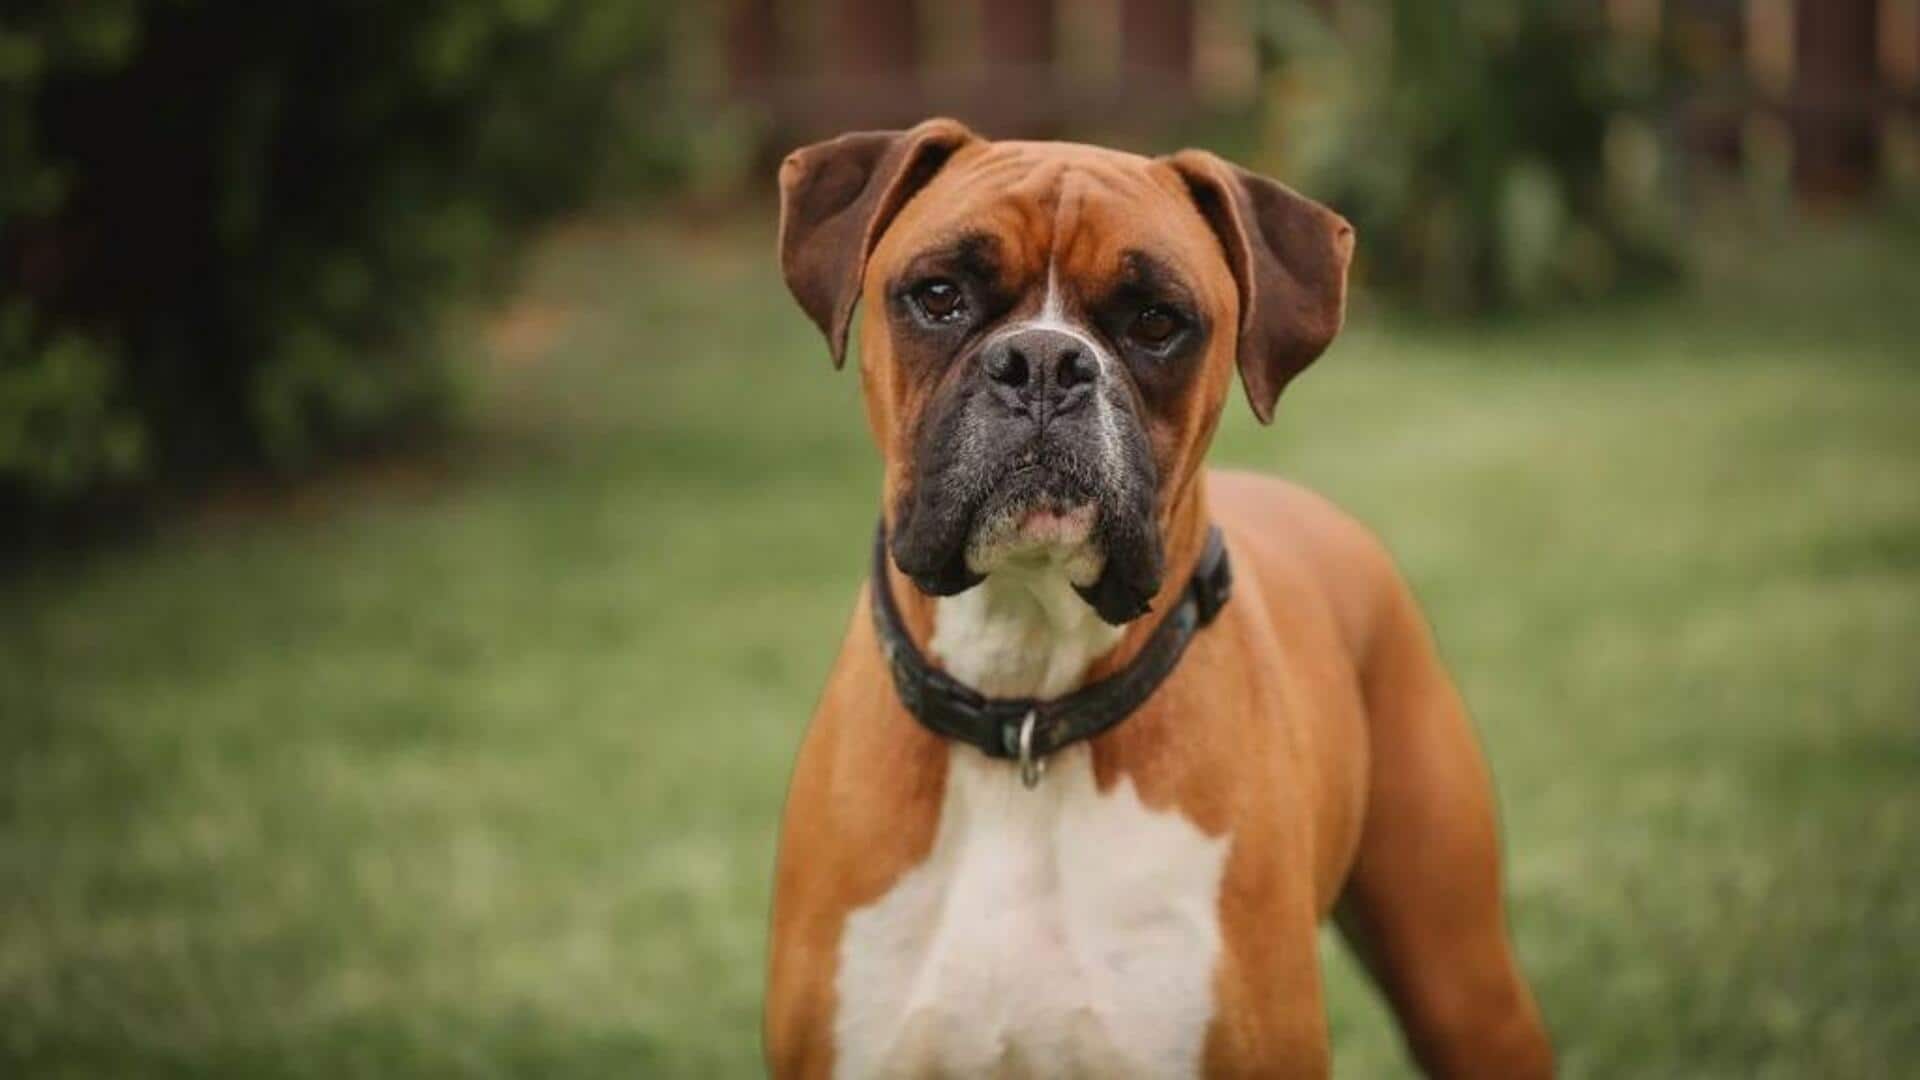 Boxer breed heatstroke prevention: Follow these tips for its well-being